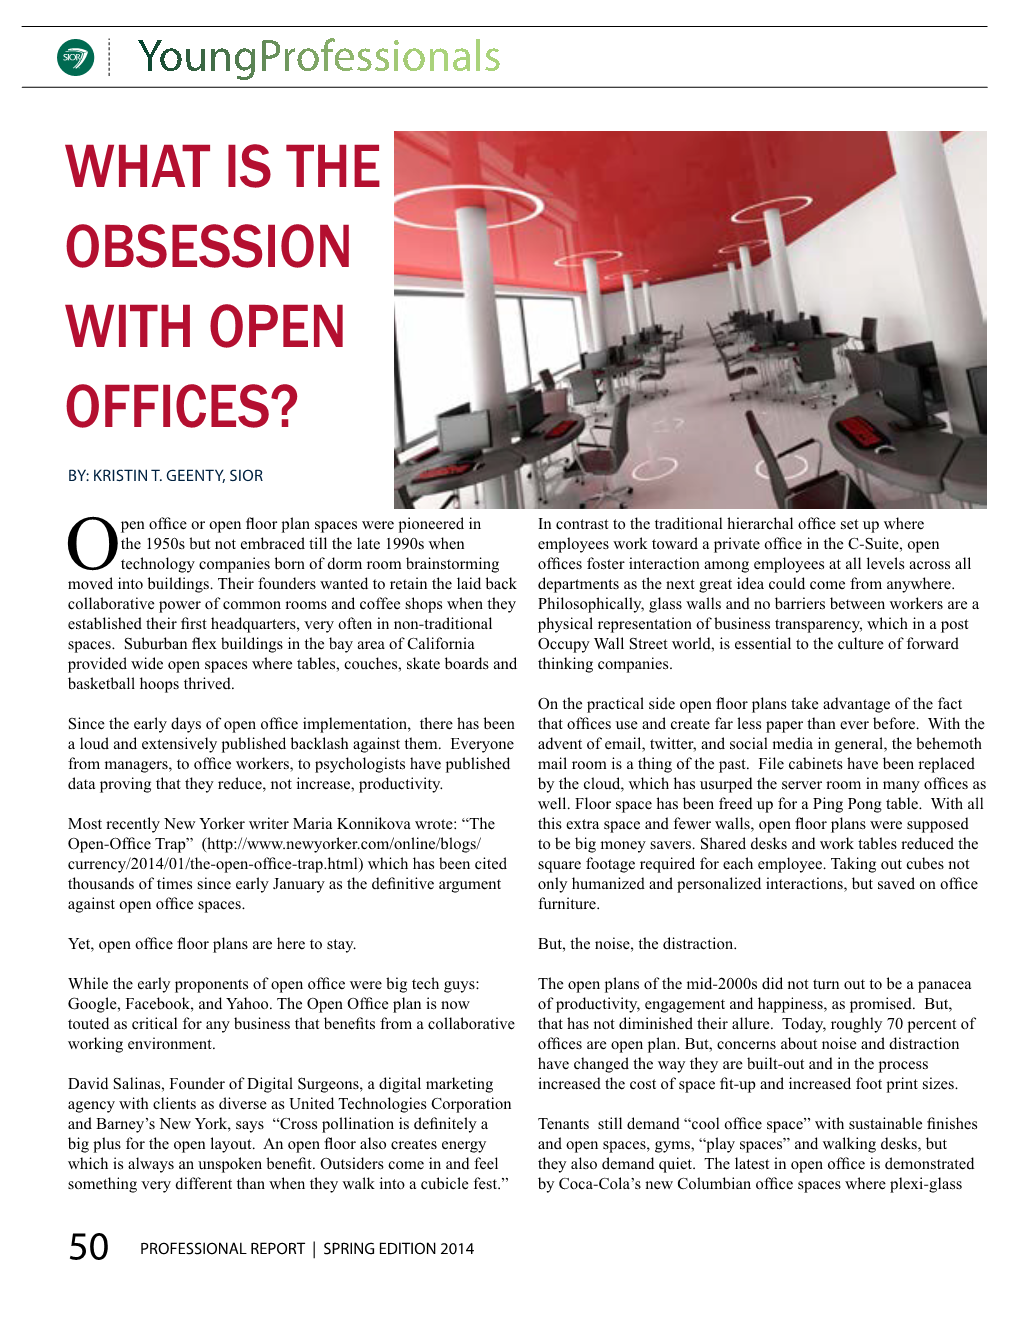 What Is the Obsession with Open Offices?